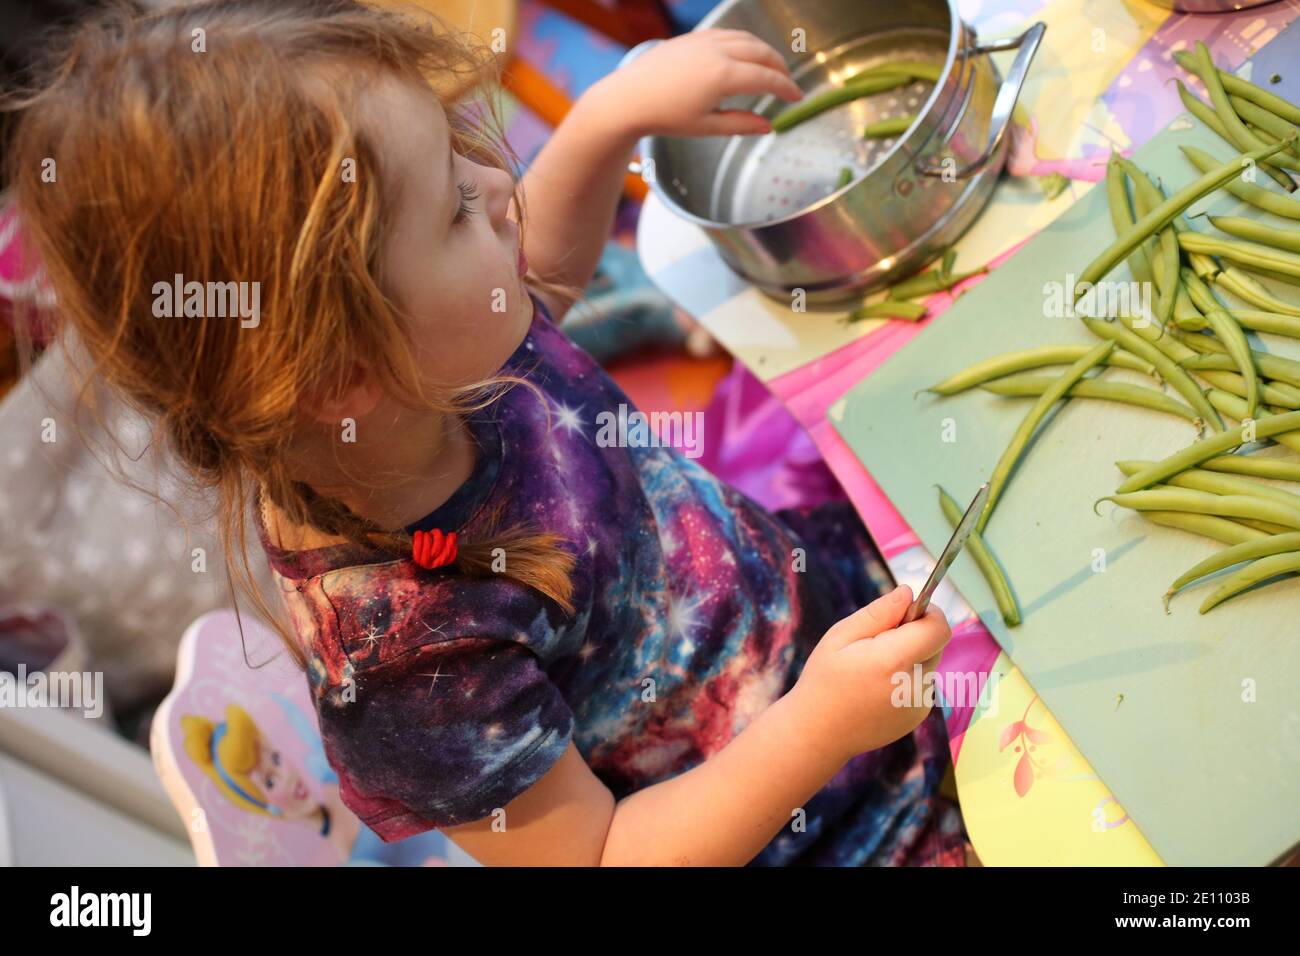 4 year old girl preparing green beans for the family meal, UK Stock Photo